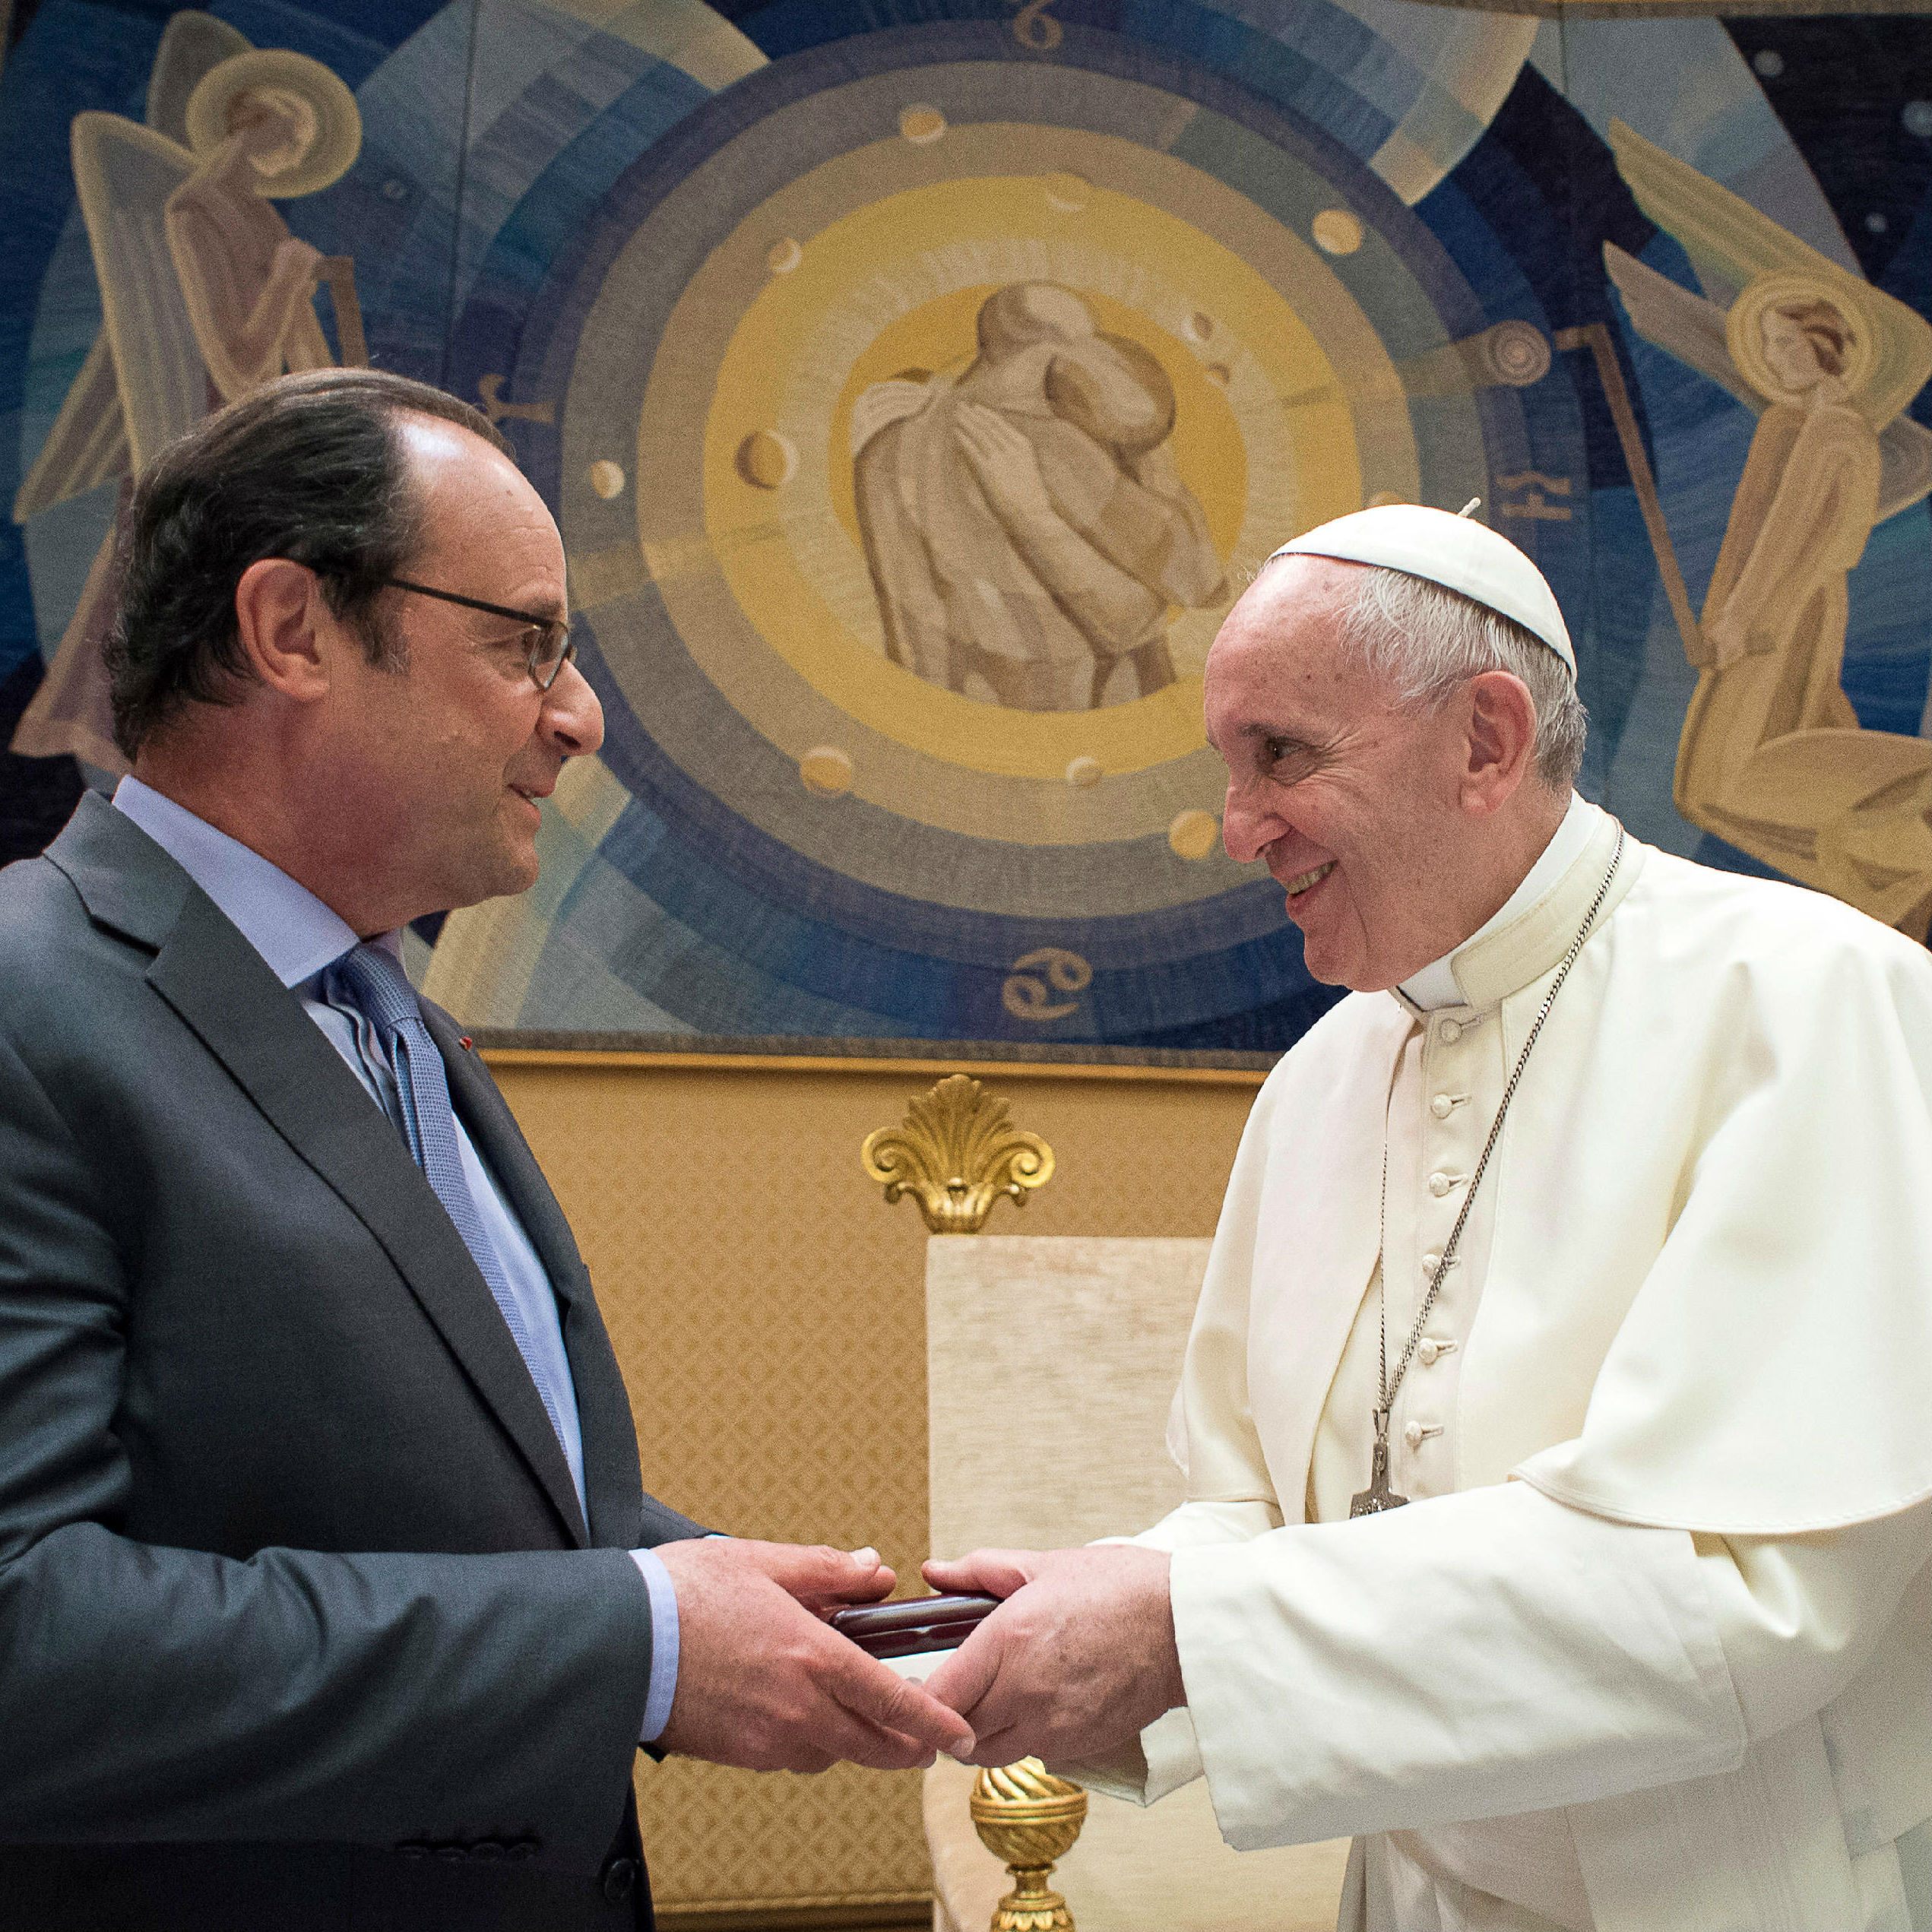 French President visits Pope Francis as Paris-Vatican tension eases